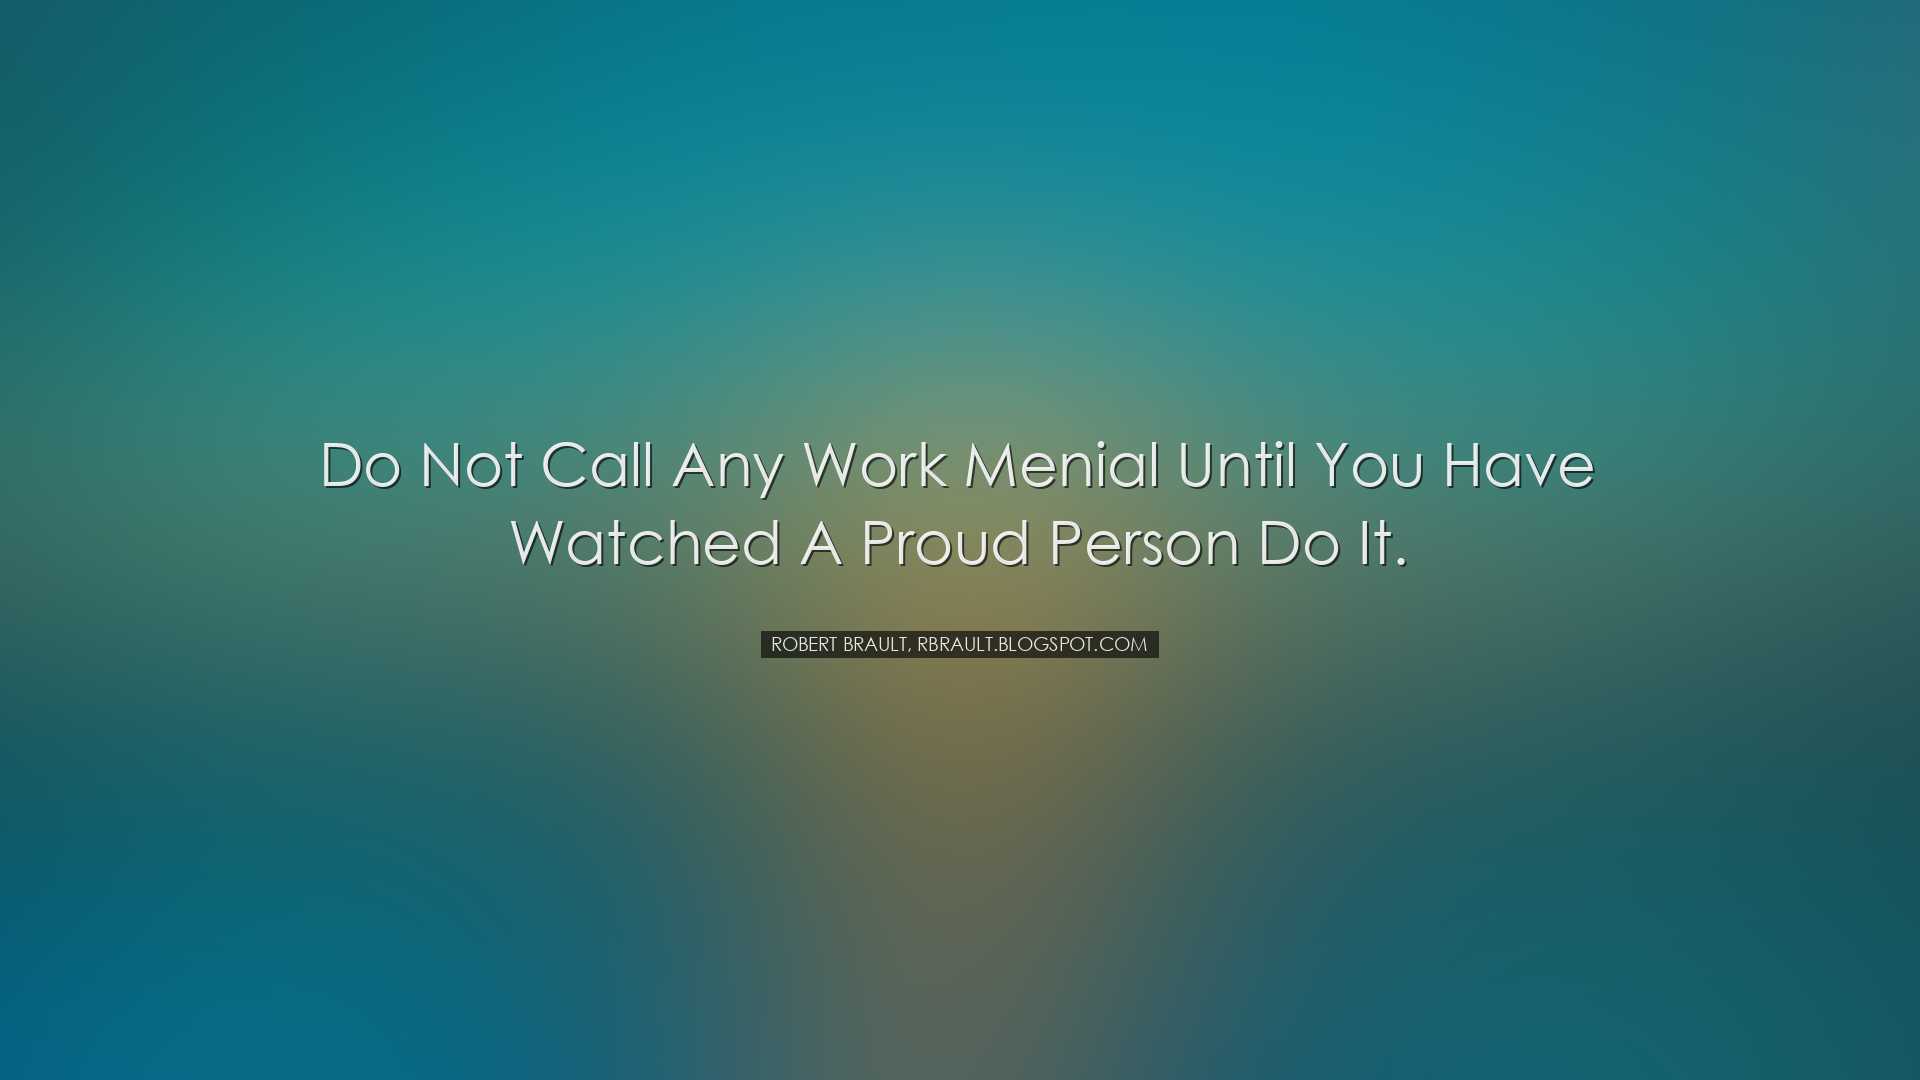 Do not call any work menial until you have watched a proud person